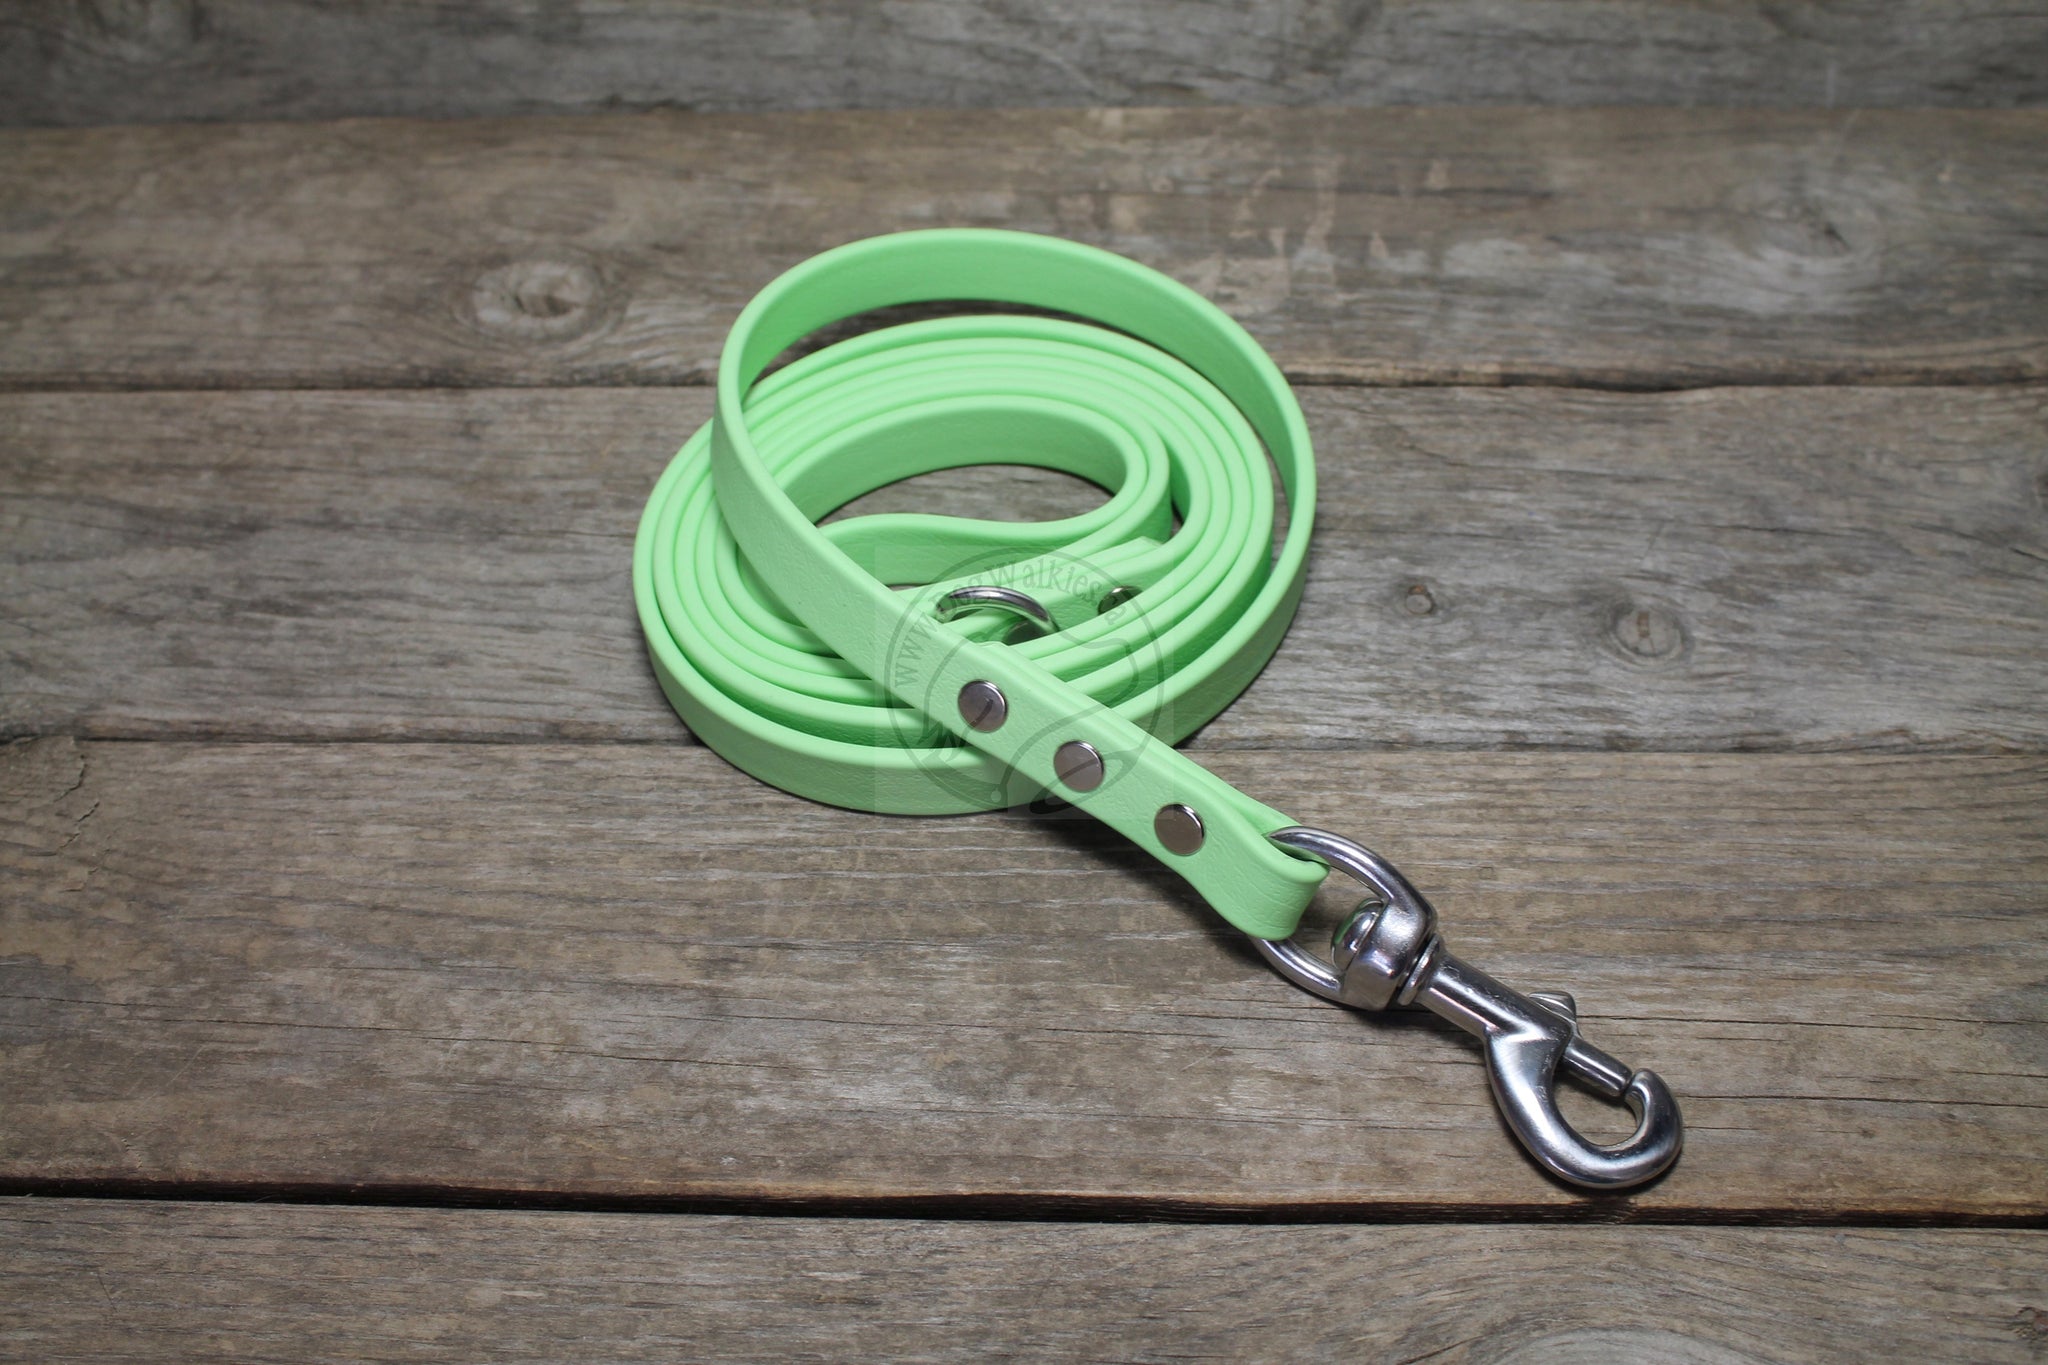 Discontinued- Limited Pastel Mint Green Biothane Dog Leash